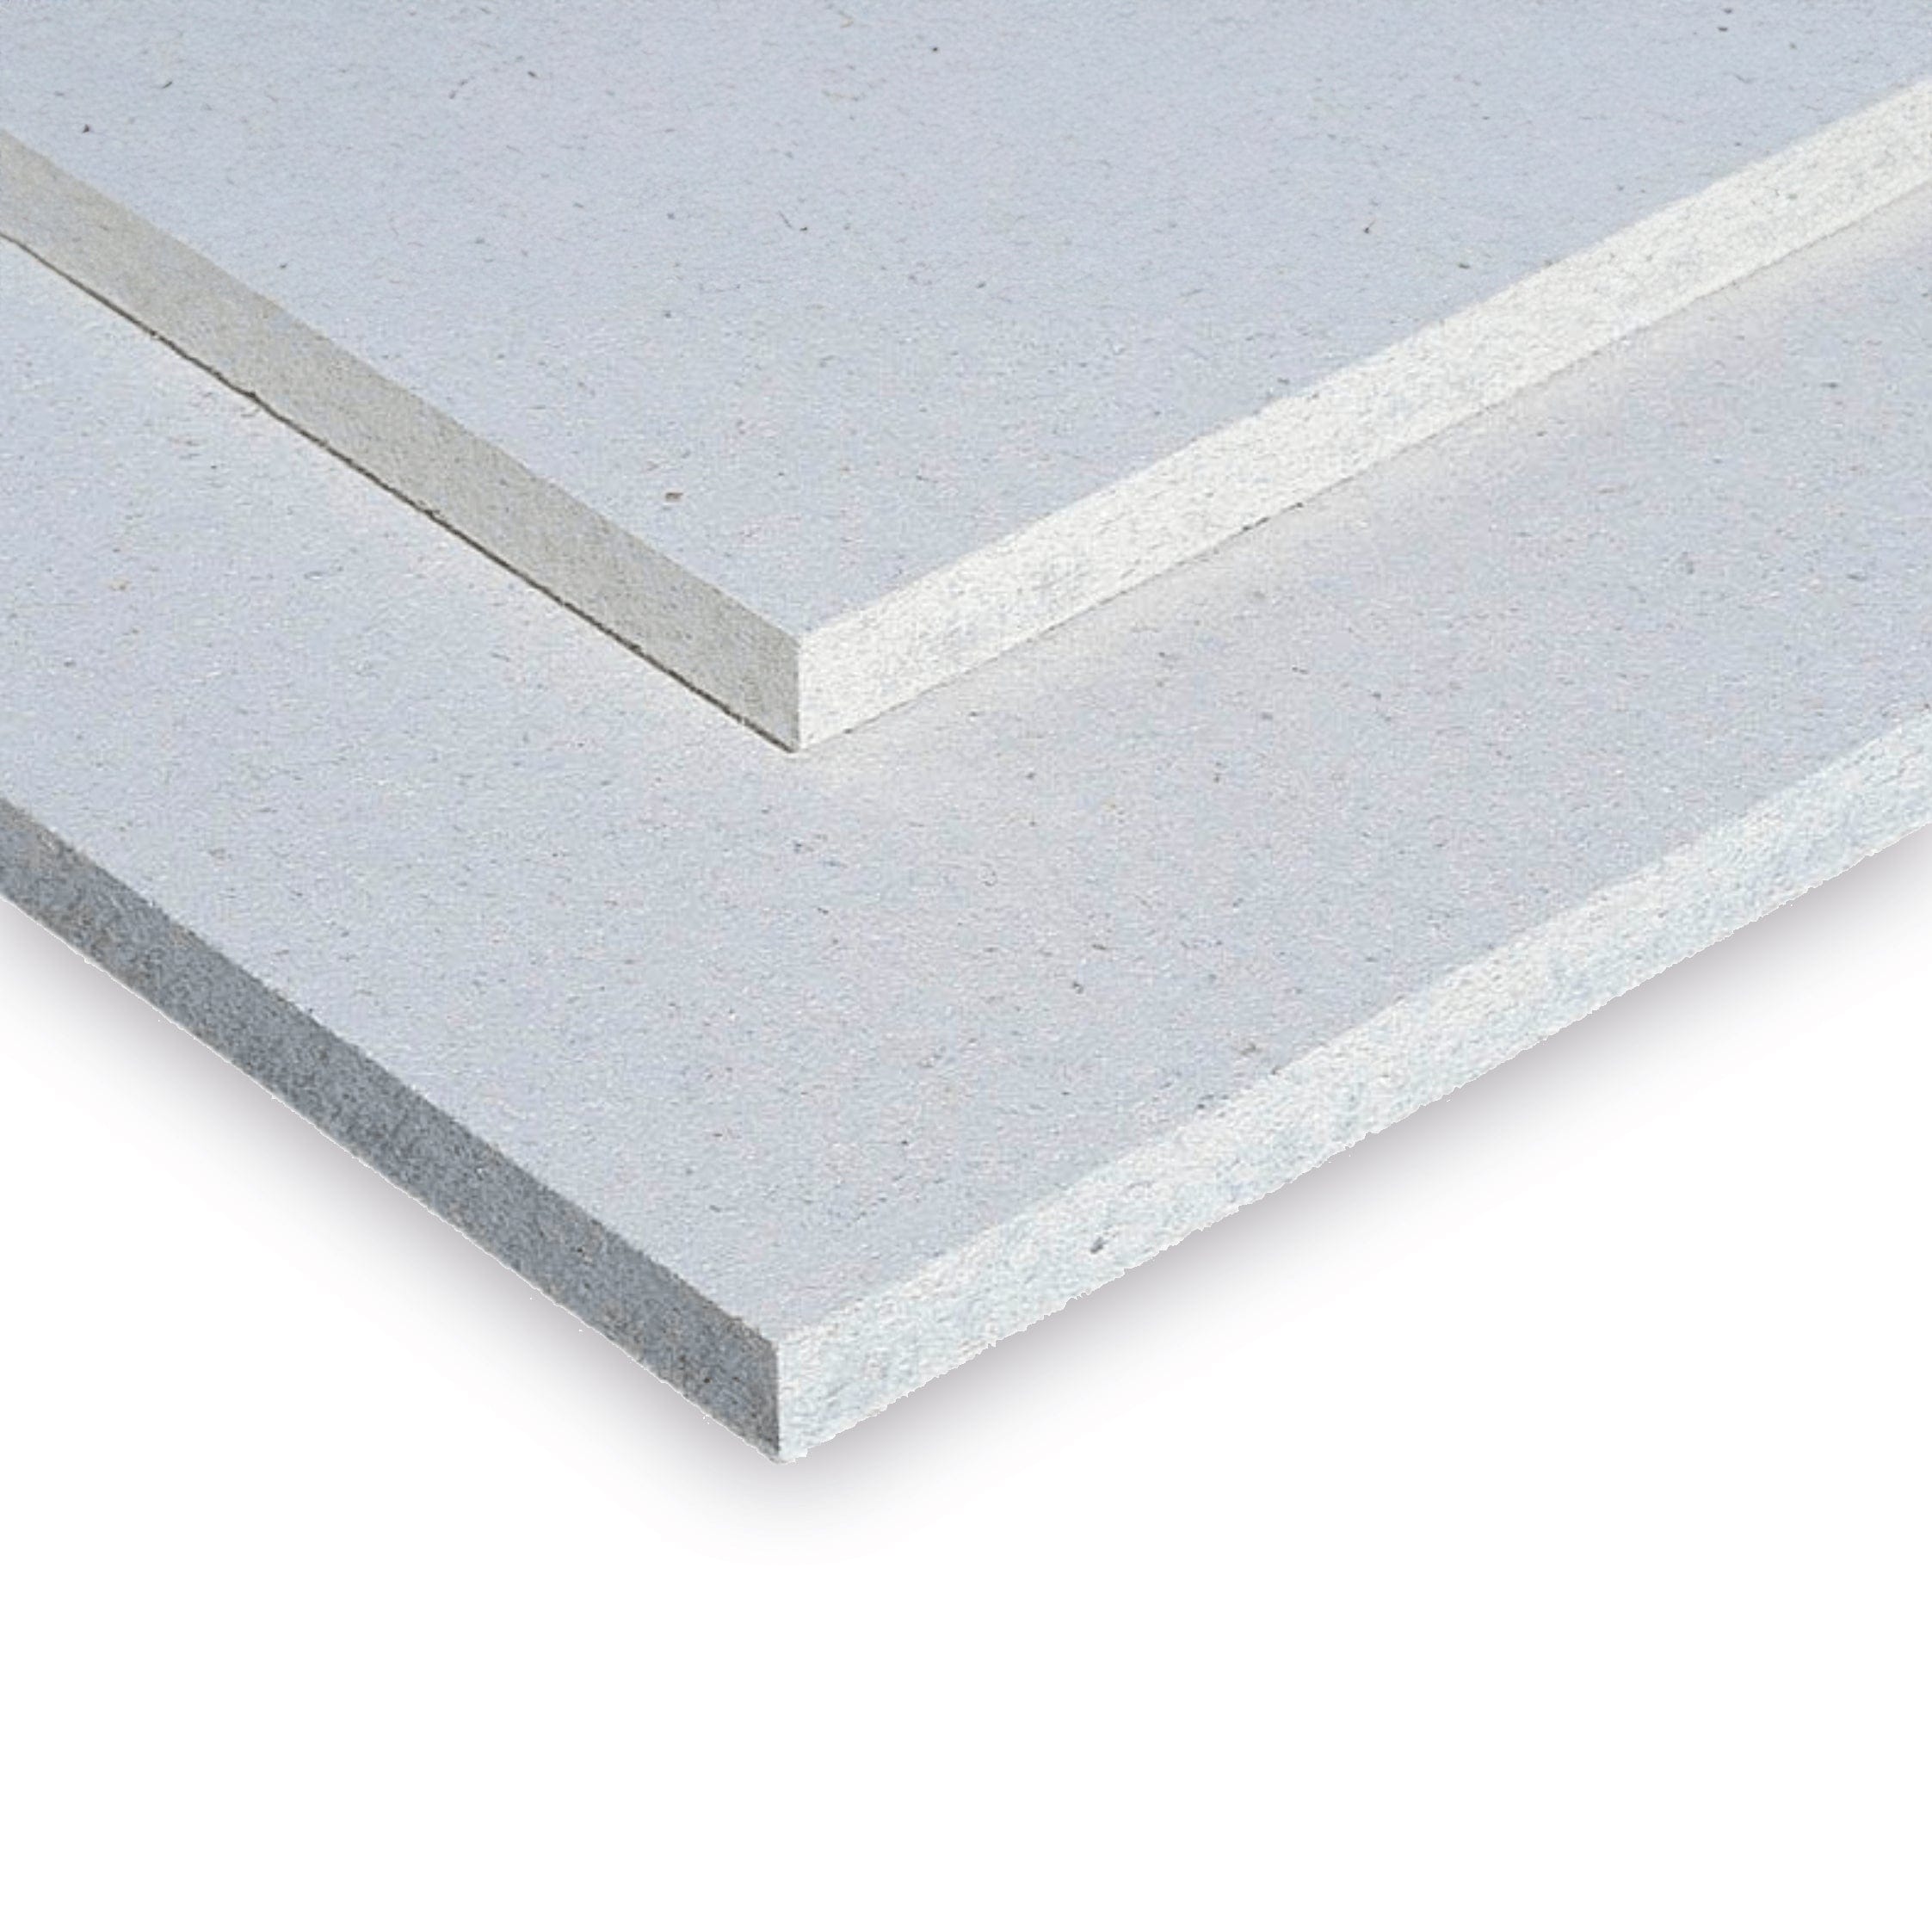 Fermacell Fermacell® 2E11 Dry Screed Overlay Board | 1500mm x 500mm x 20mm